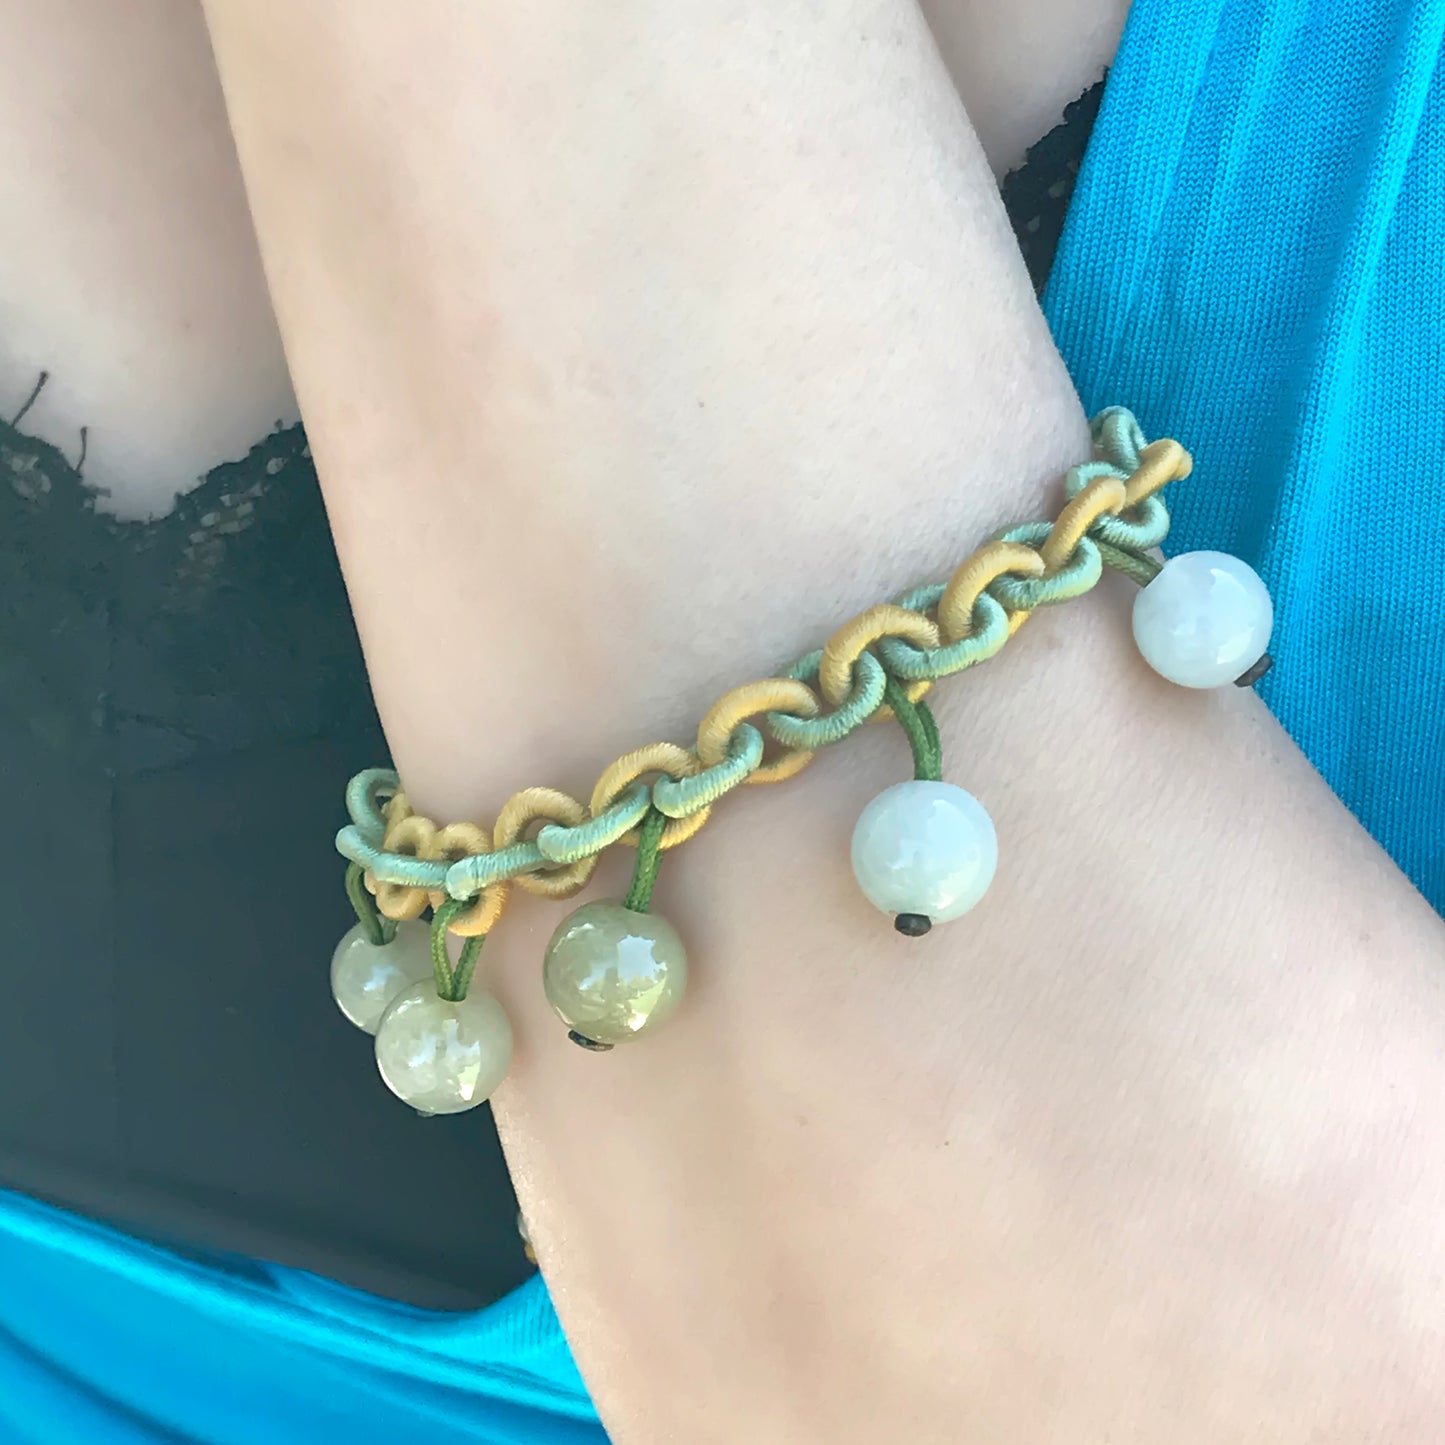 Look Vibrant and Earthy with a Beads Jade Bracelet